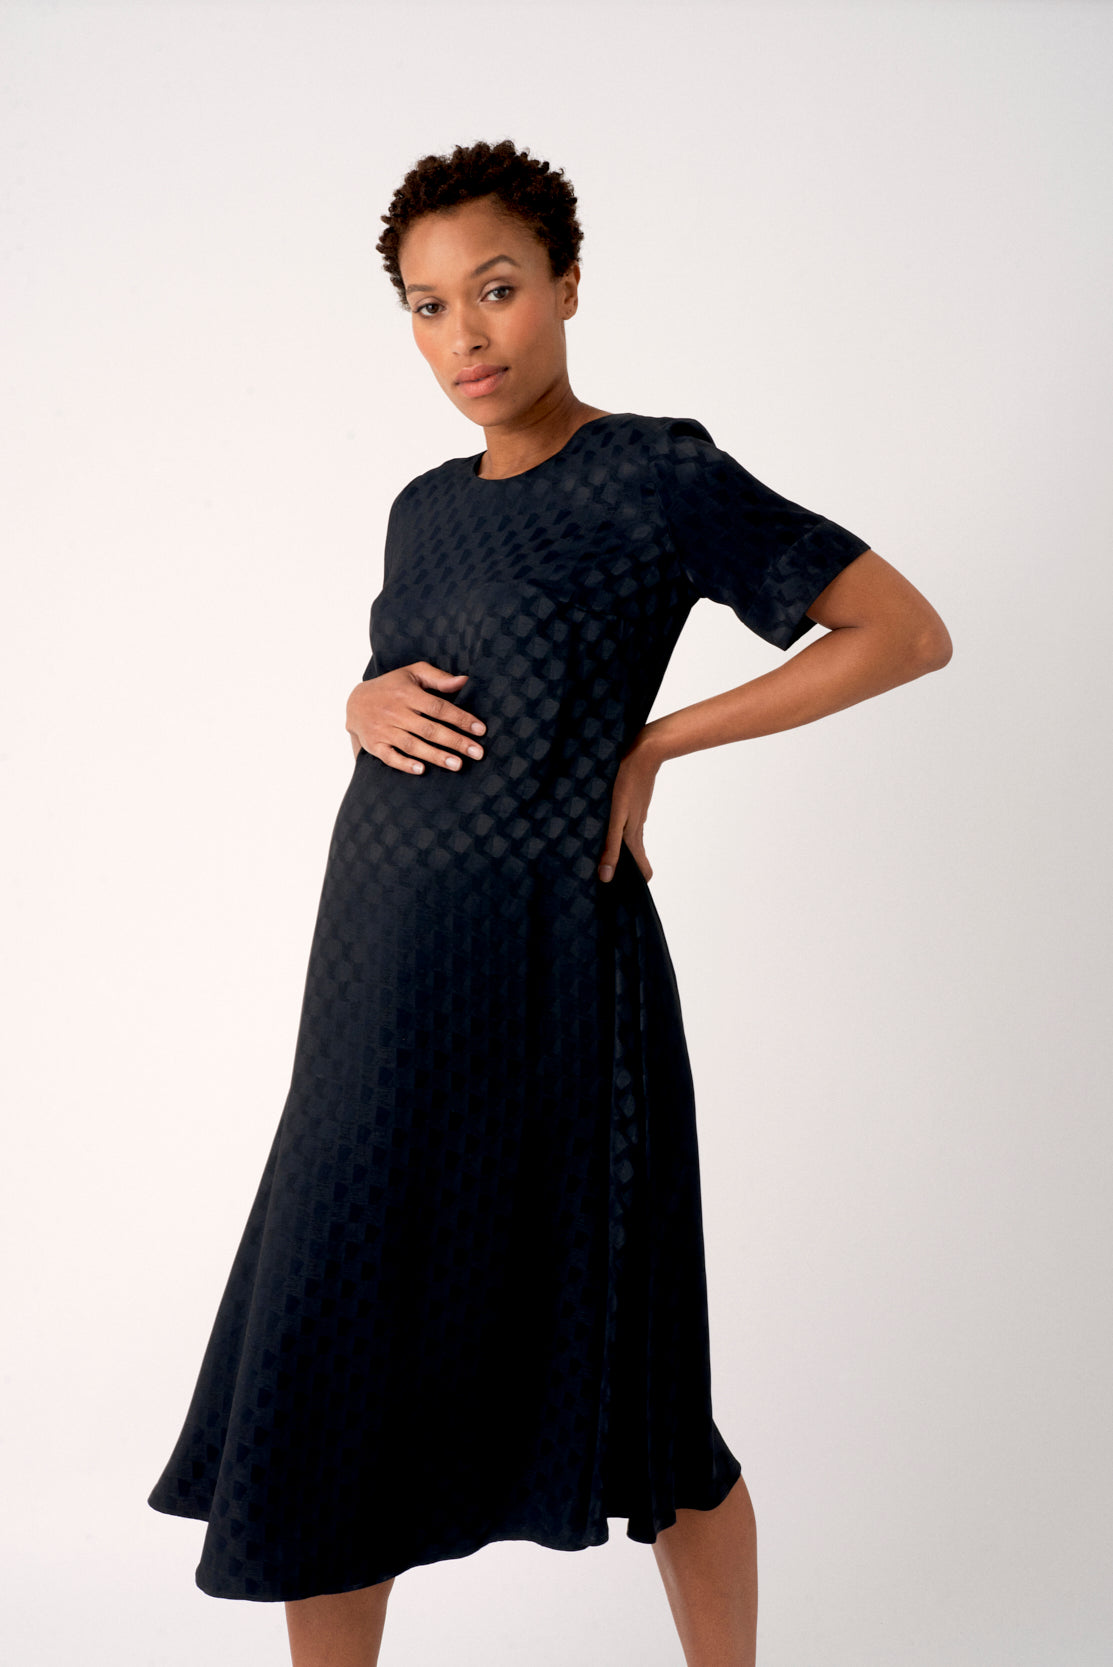 Black trapeze maternity dress. A-line trapeze style maternity dress, designed to be flattering for all stages of pregnancy and post-pregnancy too. Made in a beautiful luxurious textured satin, this is the perfect maternity dress for everyday, occasions or the office.